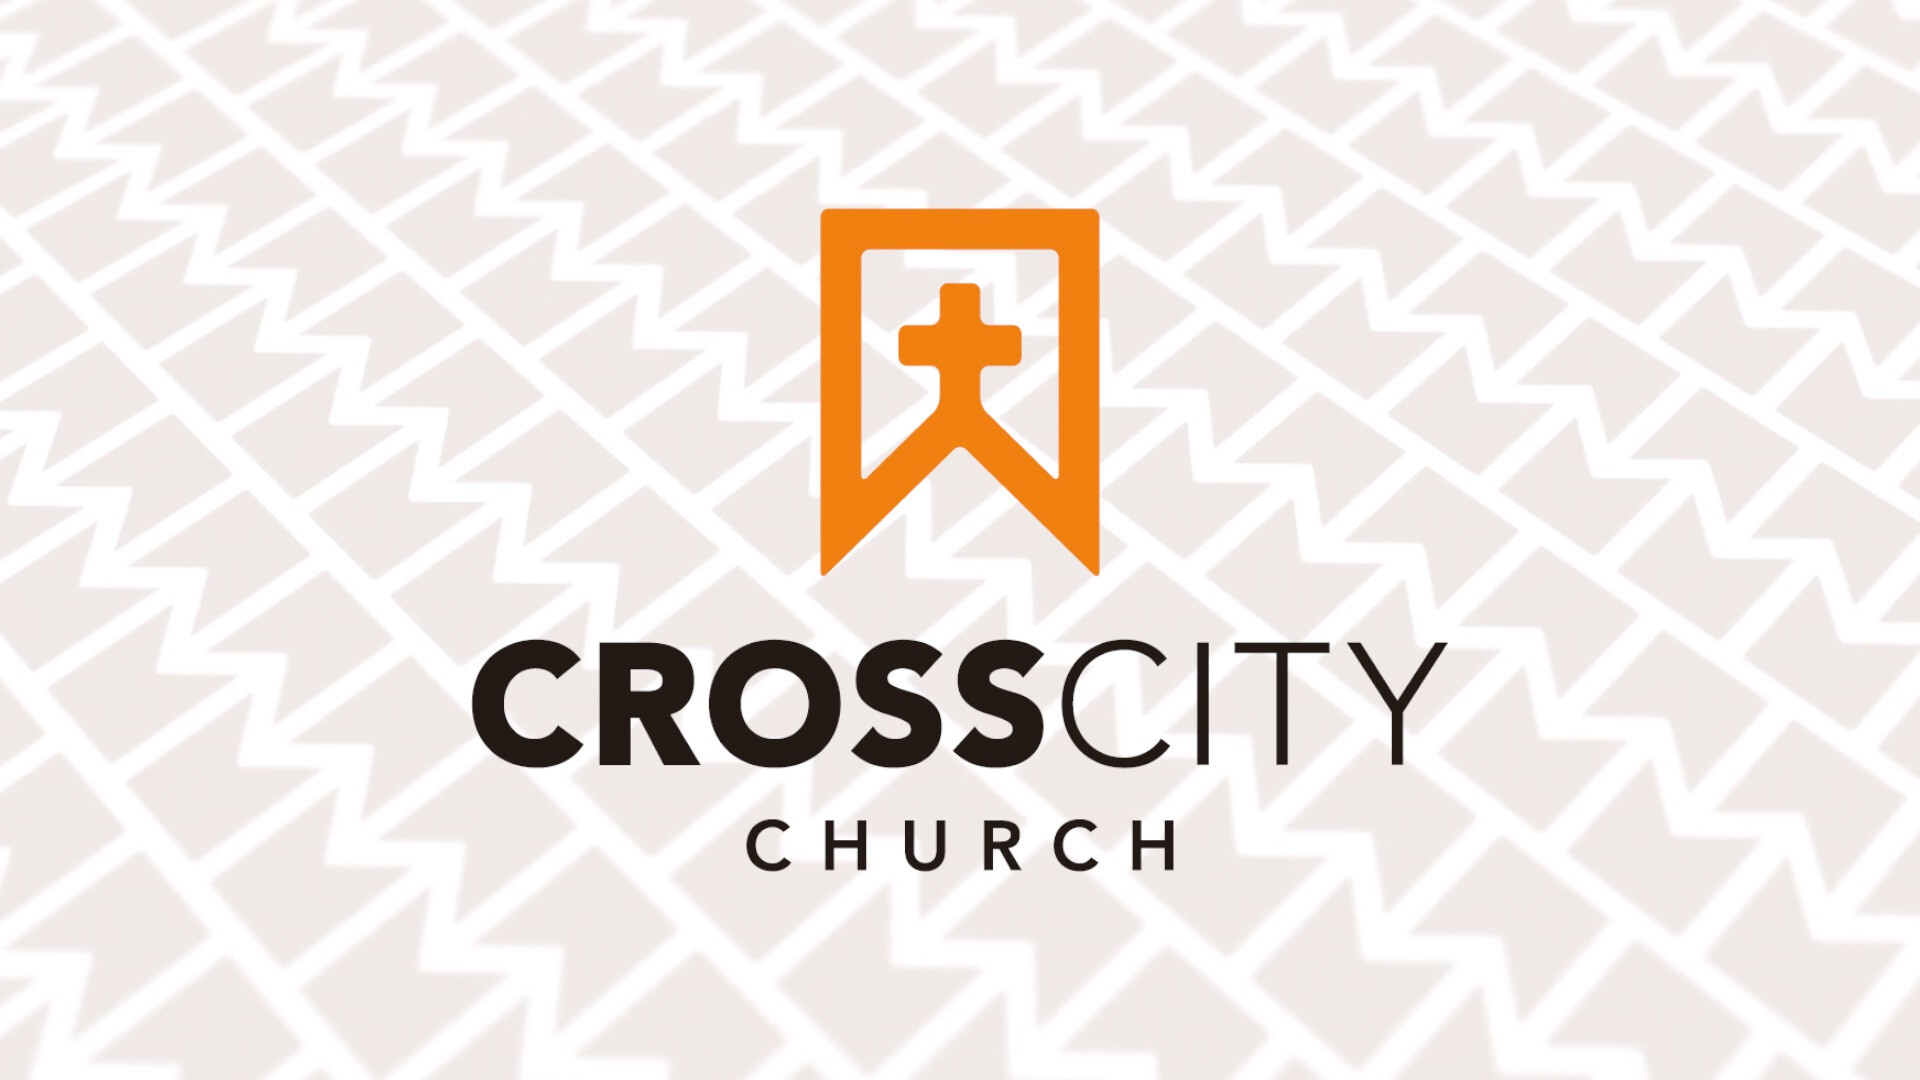 Taking the Cross to the City